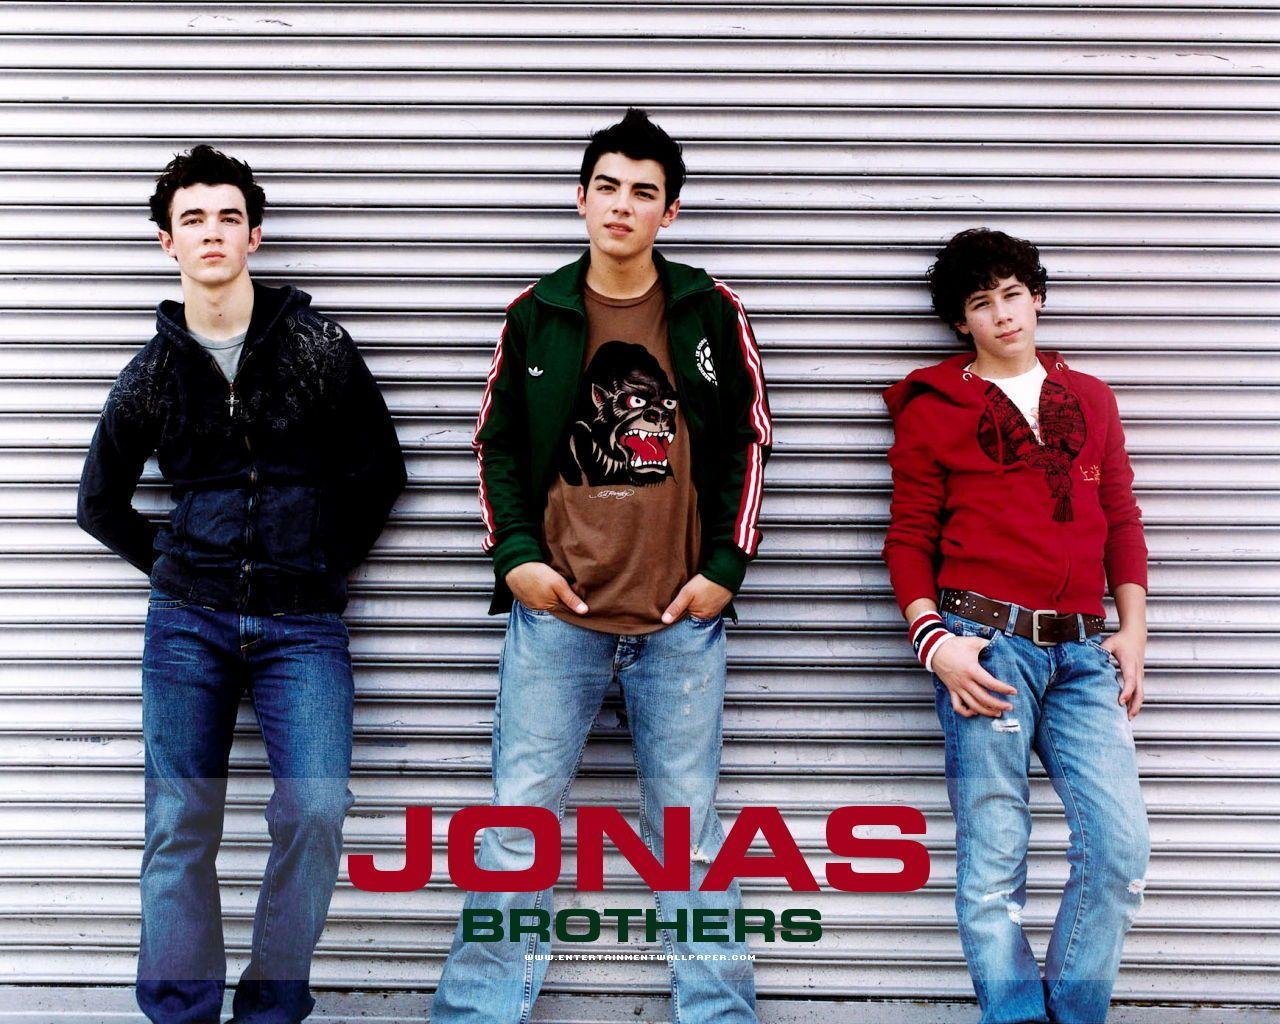 Jonas Brothers It's About Time